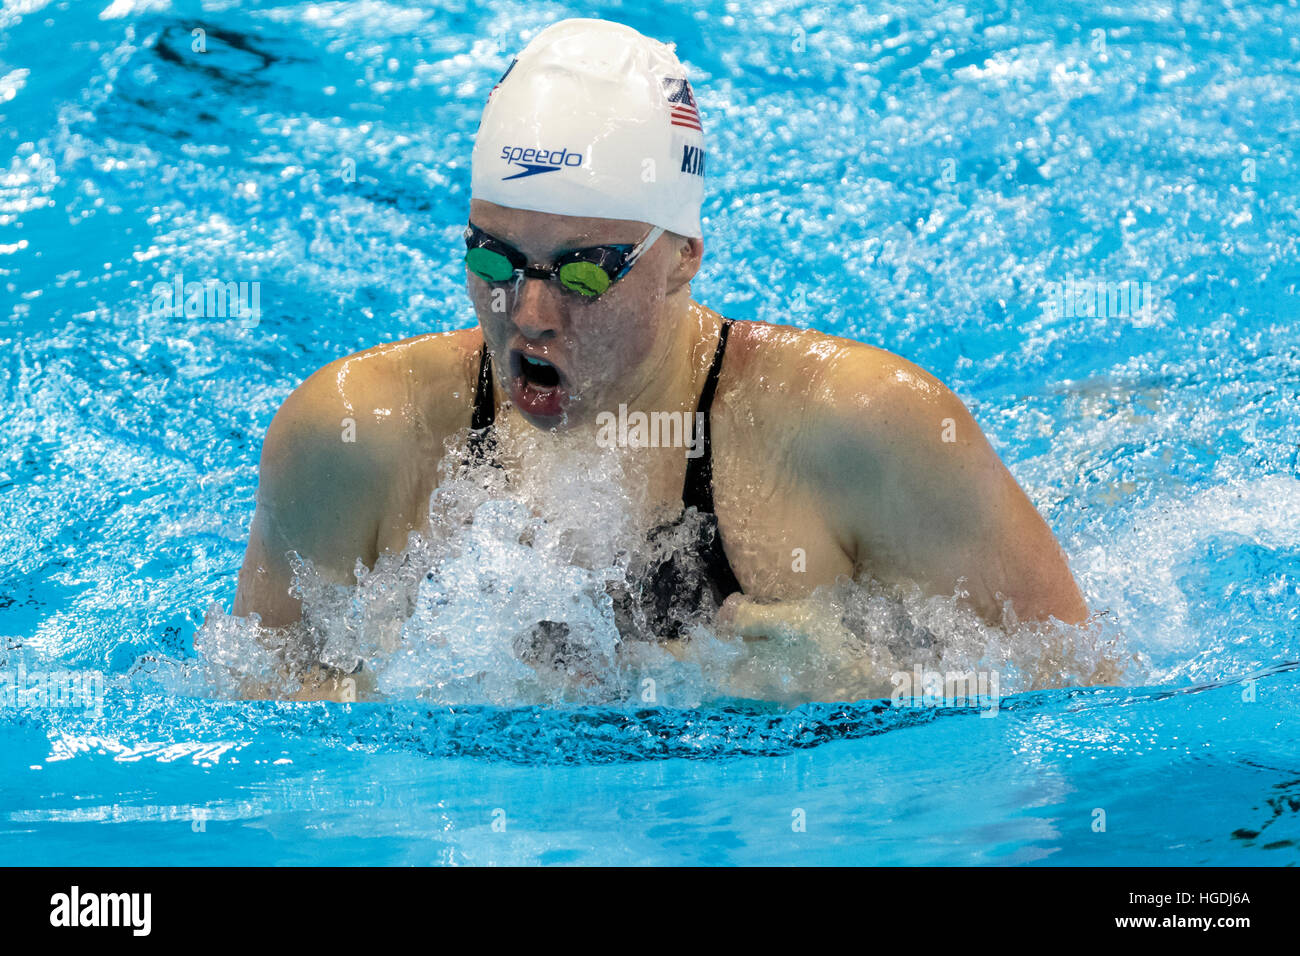 Rio de Janeiro, Brazil. 10 August 2016. Lilly King (USA) competing in the women's 200m breaststroke heat at the 2016 Olympic Summer Games. ©Paul J. Su Stock Photo